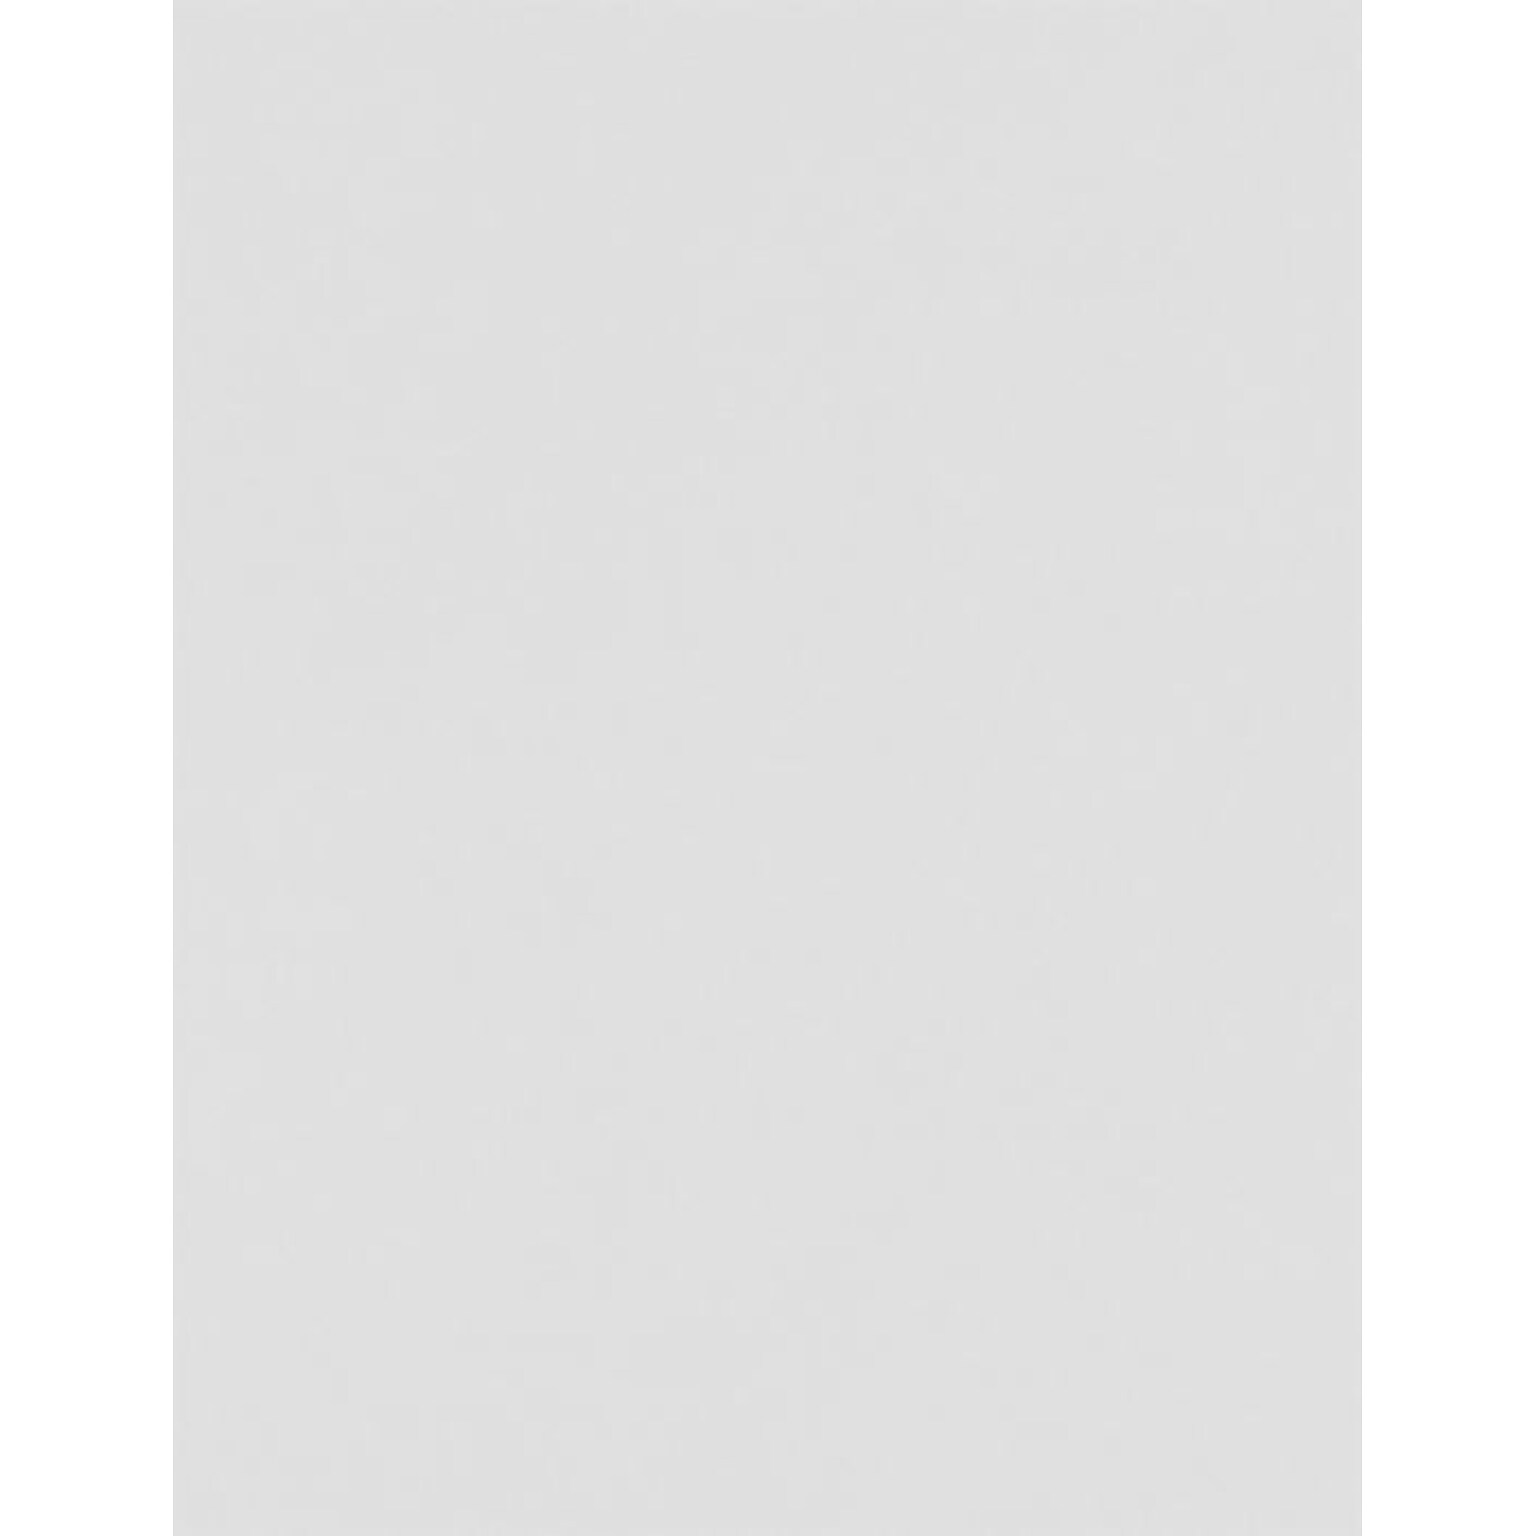 LUX 8 1/2 x 11 Cardstock 50/Pack, Gray - 100% Cotton (81211-C-SG-50)